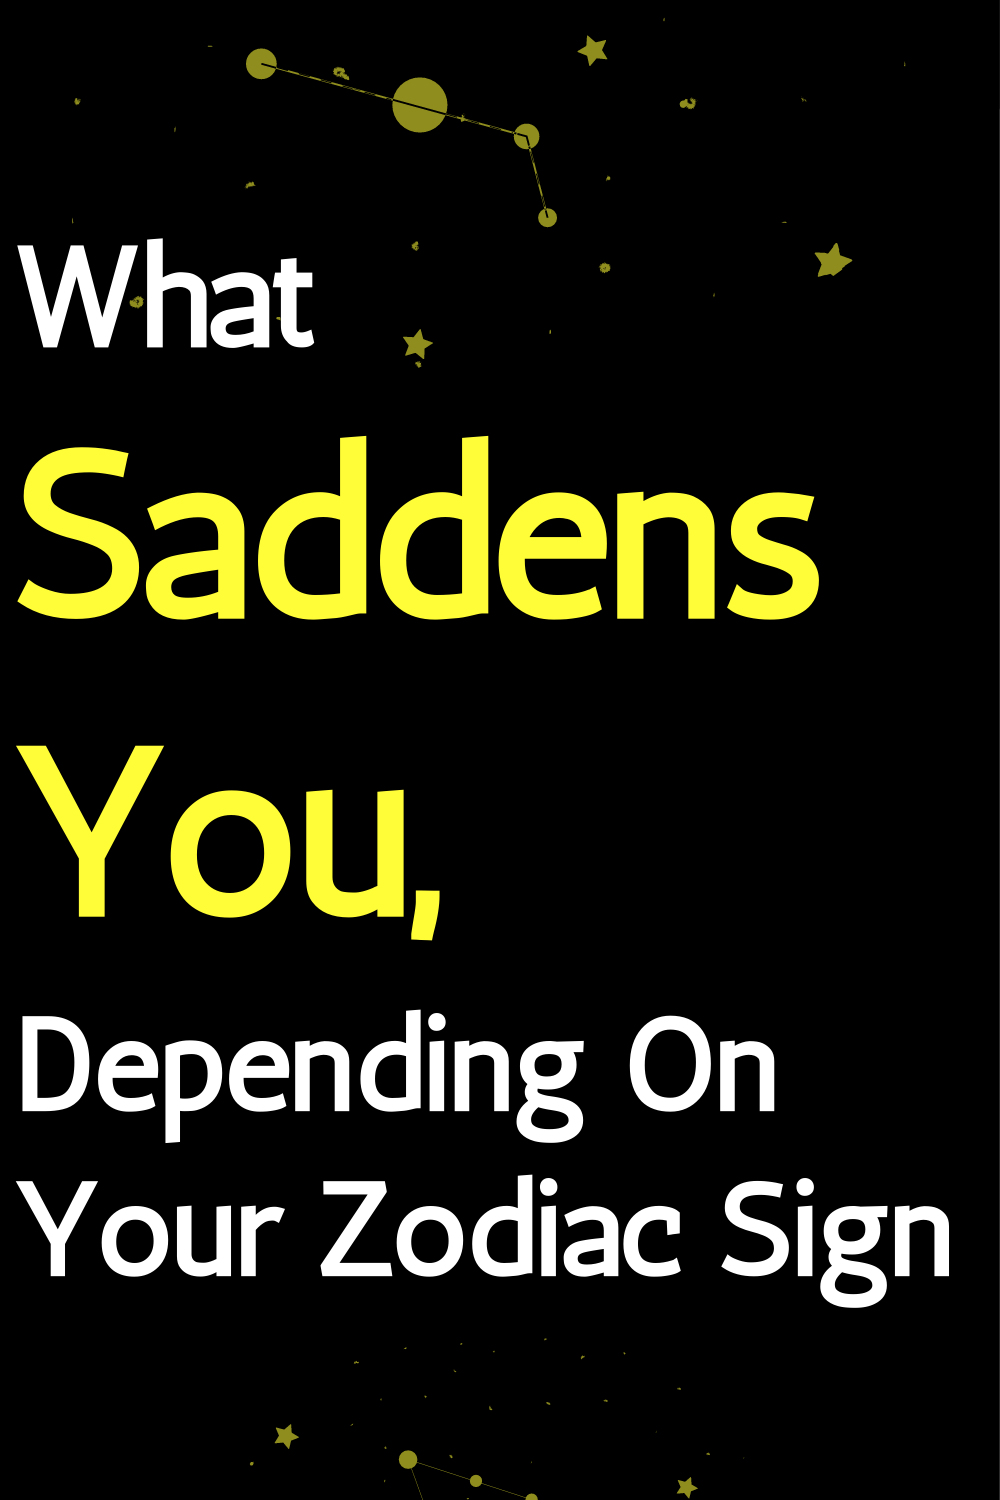 What Saddens You, Depending On Your Zodiac Sign